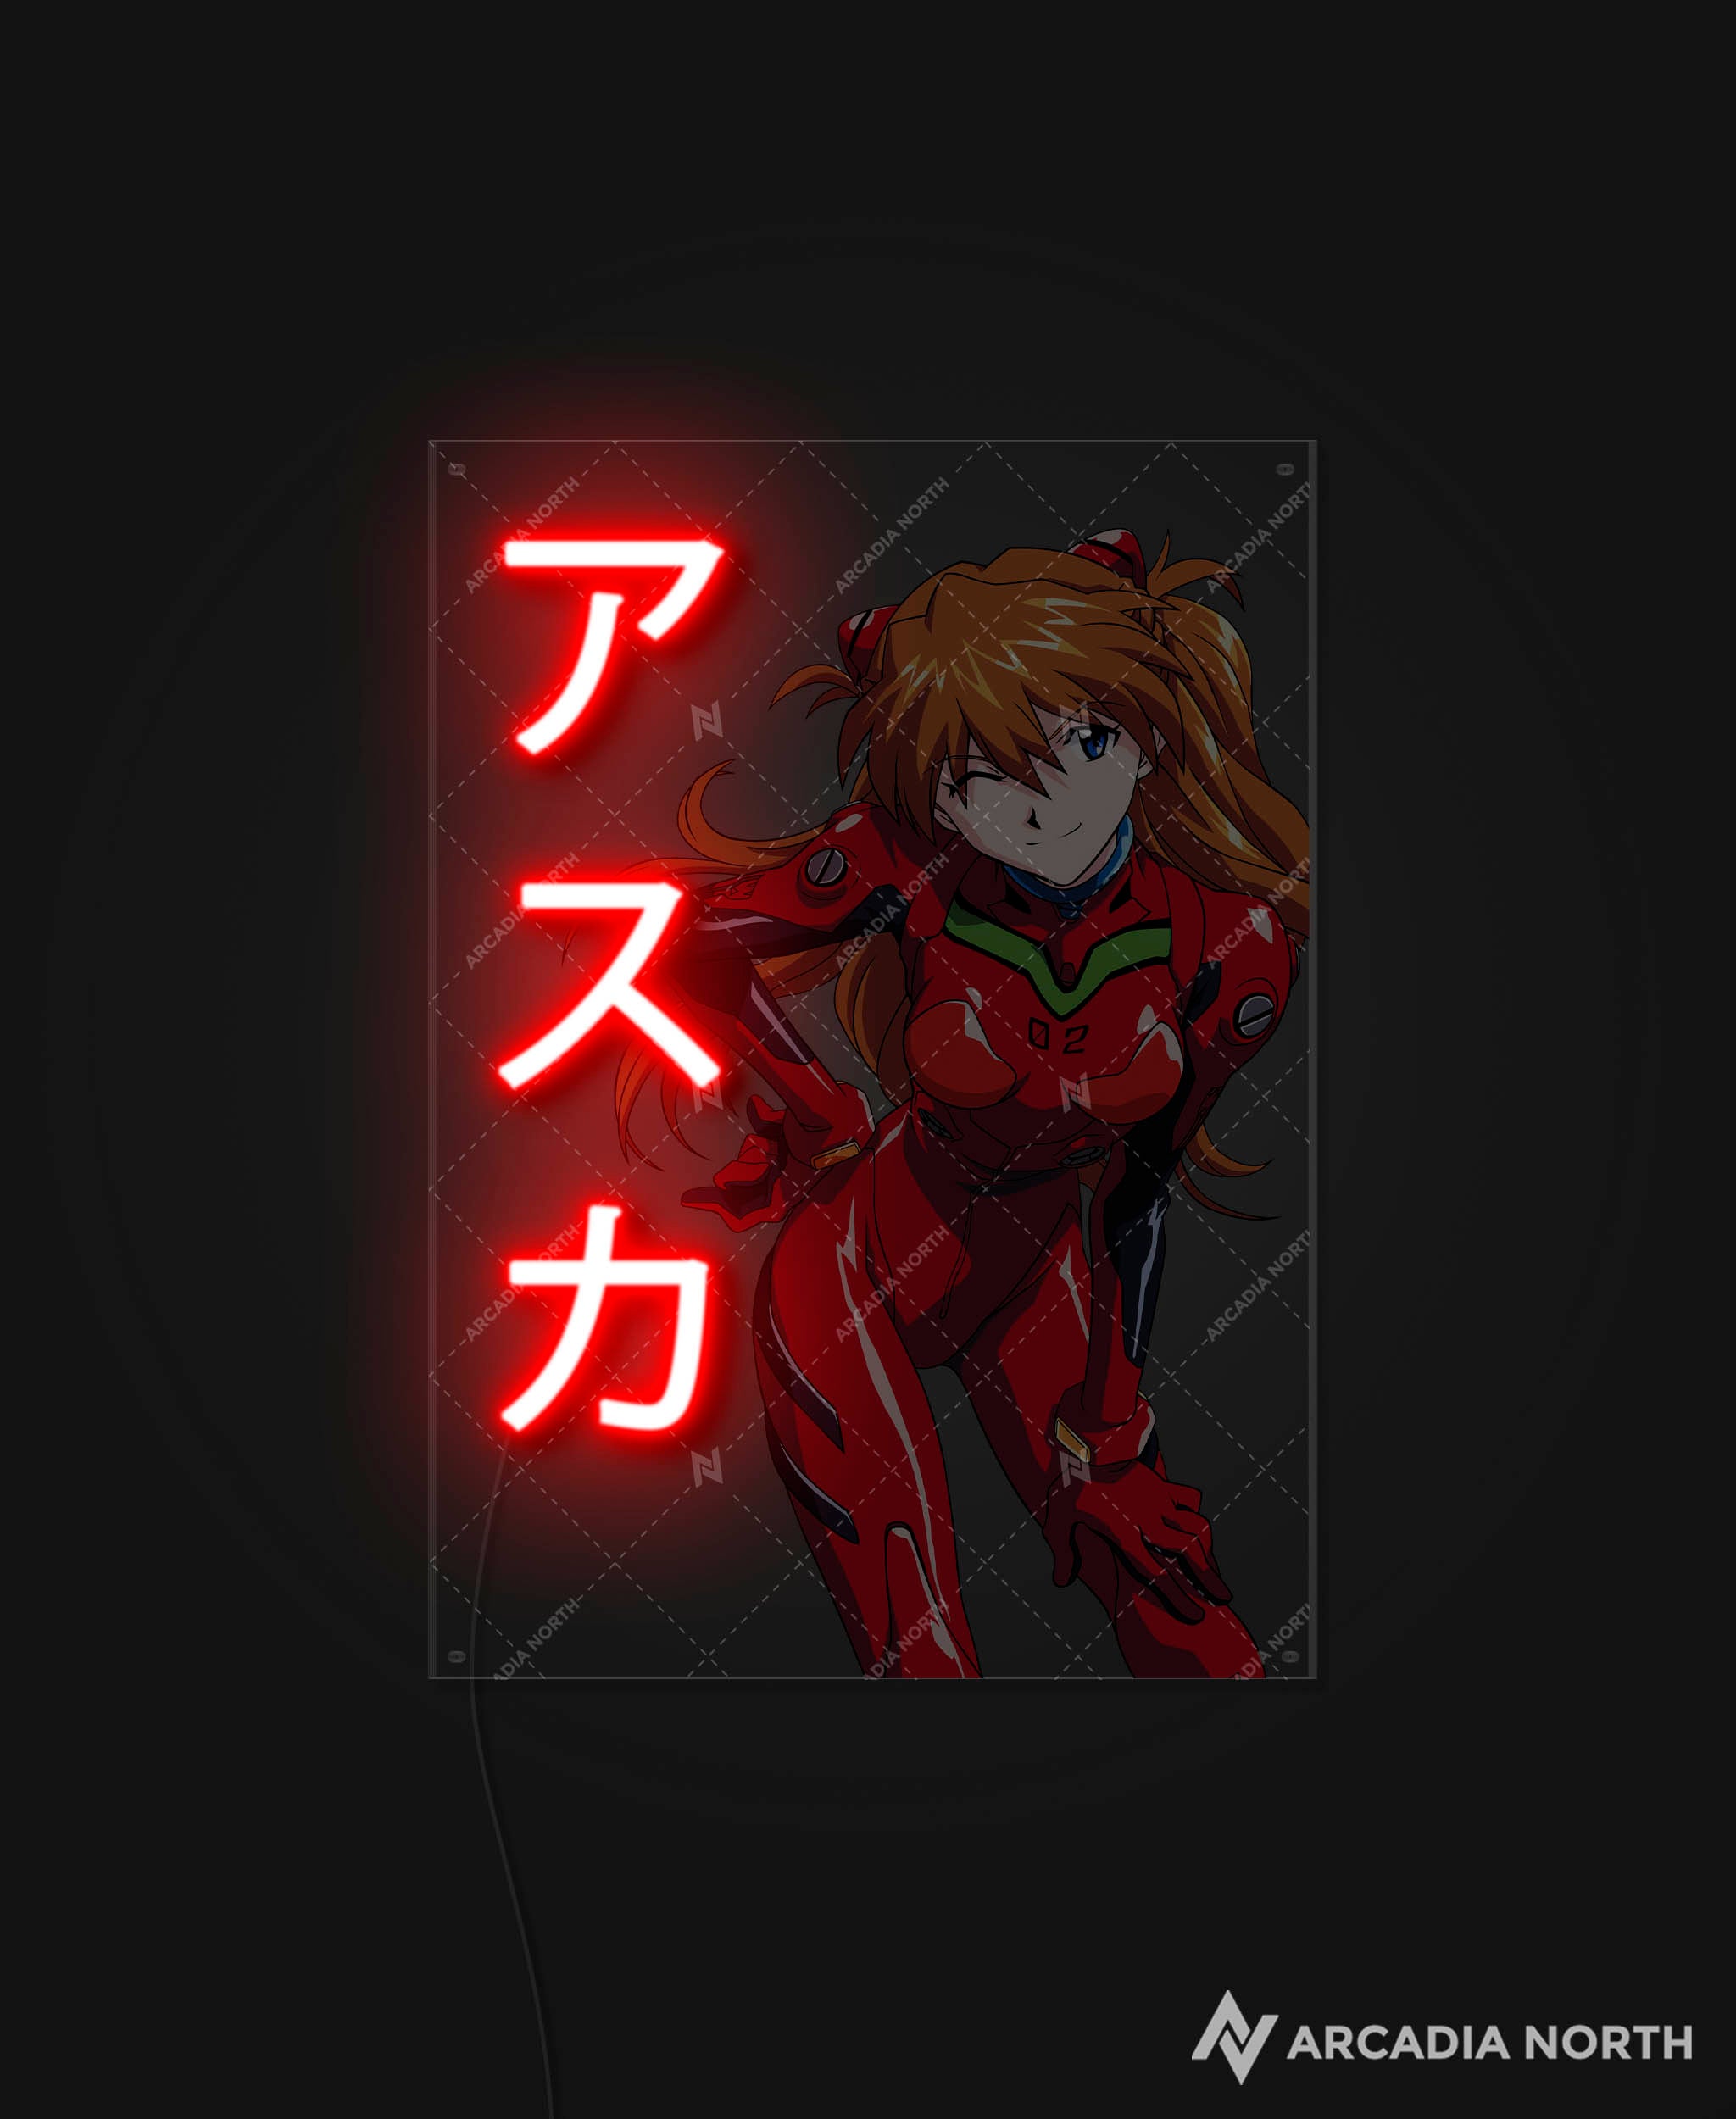 Arcadia North AURALIGHT - an LED Poster featuring the anime Neon Genesis Evangelion with Asuka Langley Soryu and her name Asuka written in Japanese Katakana. Illuminated by glowing neon LED lights. UV-printed on acrylic.